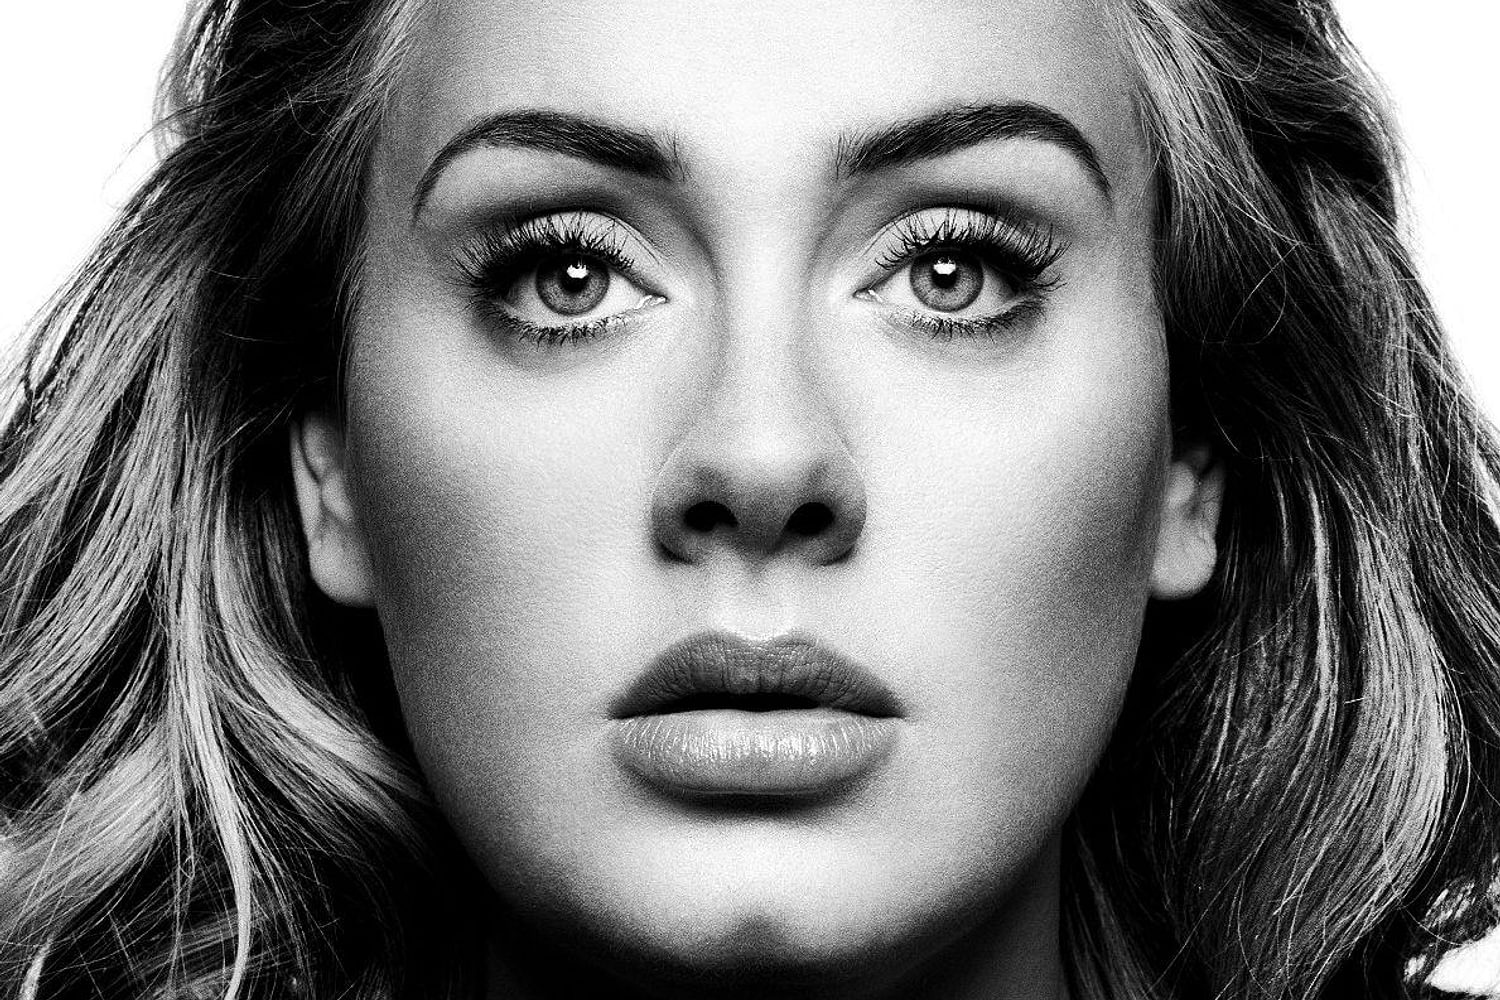 Adele to perform at BRIT Awards 2016